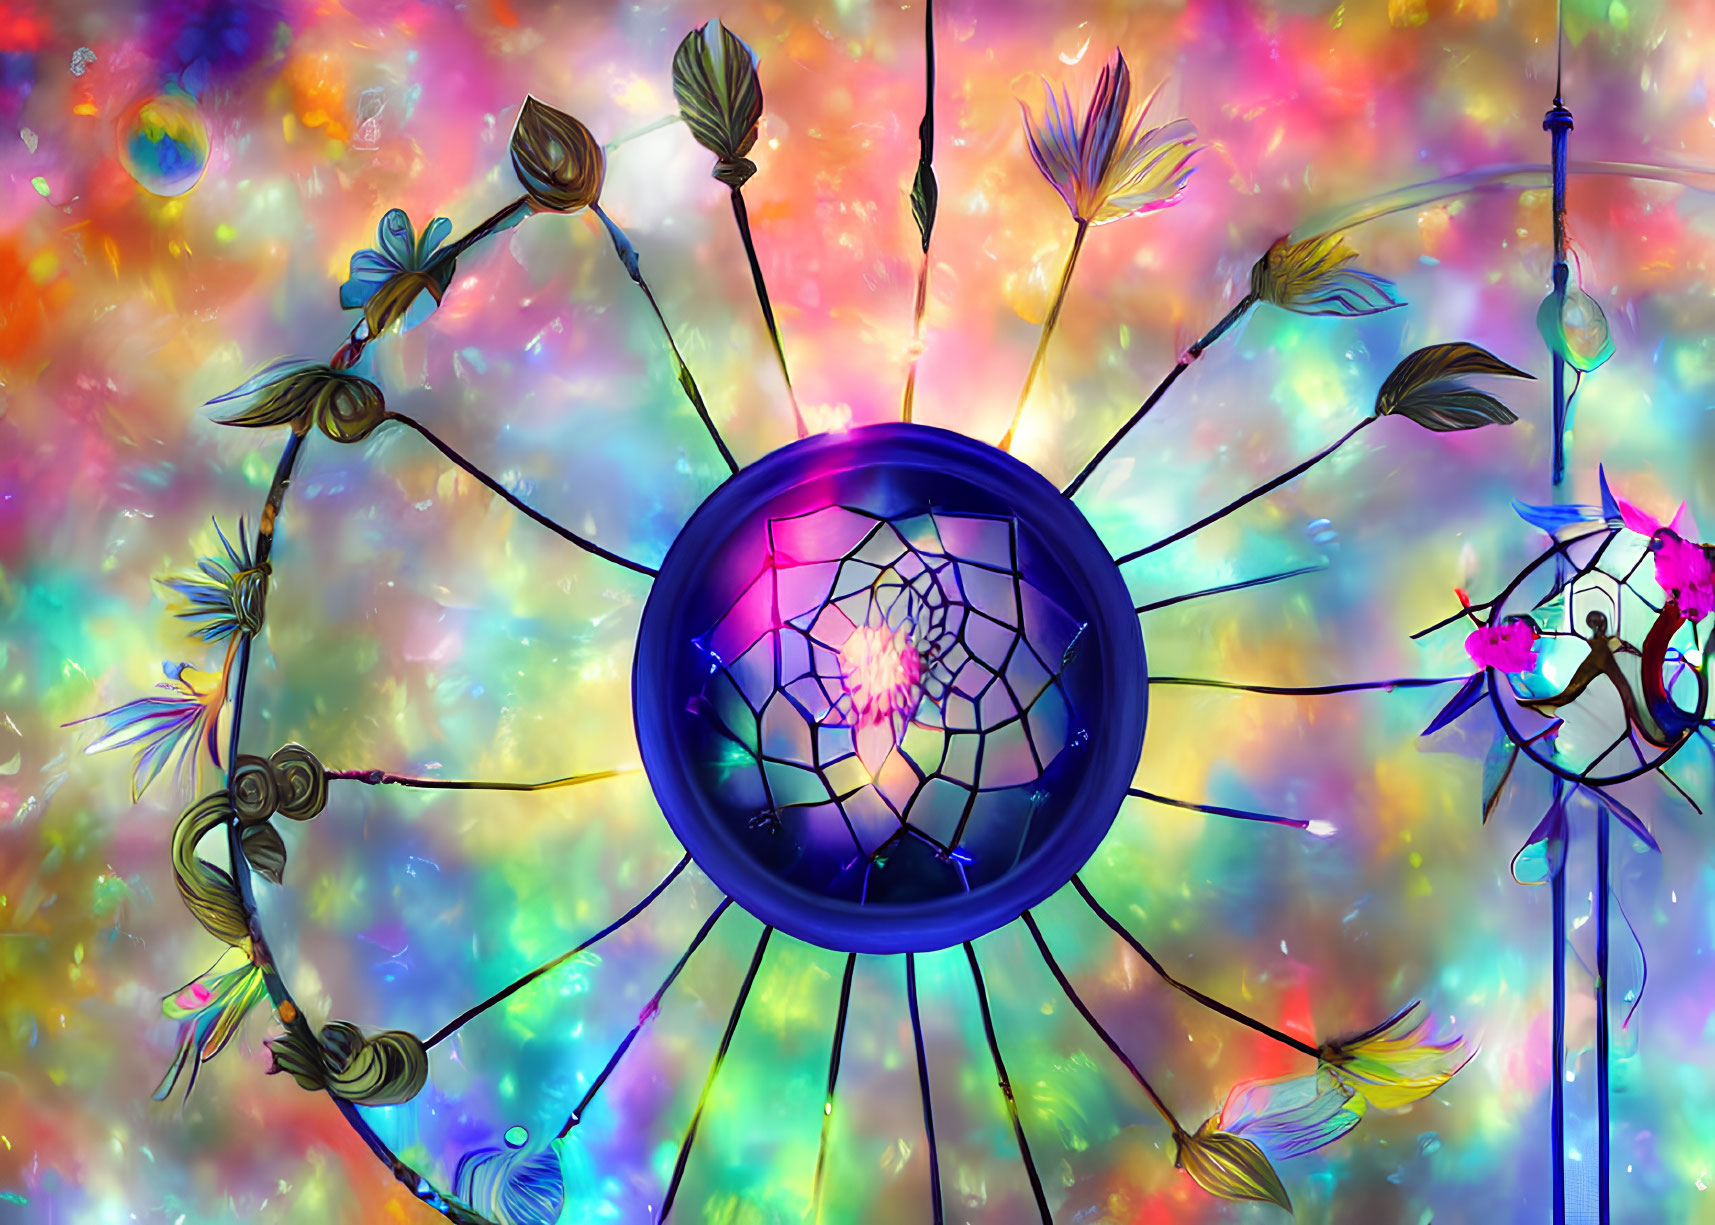 Colorful Floral Dreamcatcher on Cosmic Background